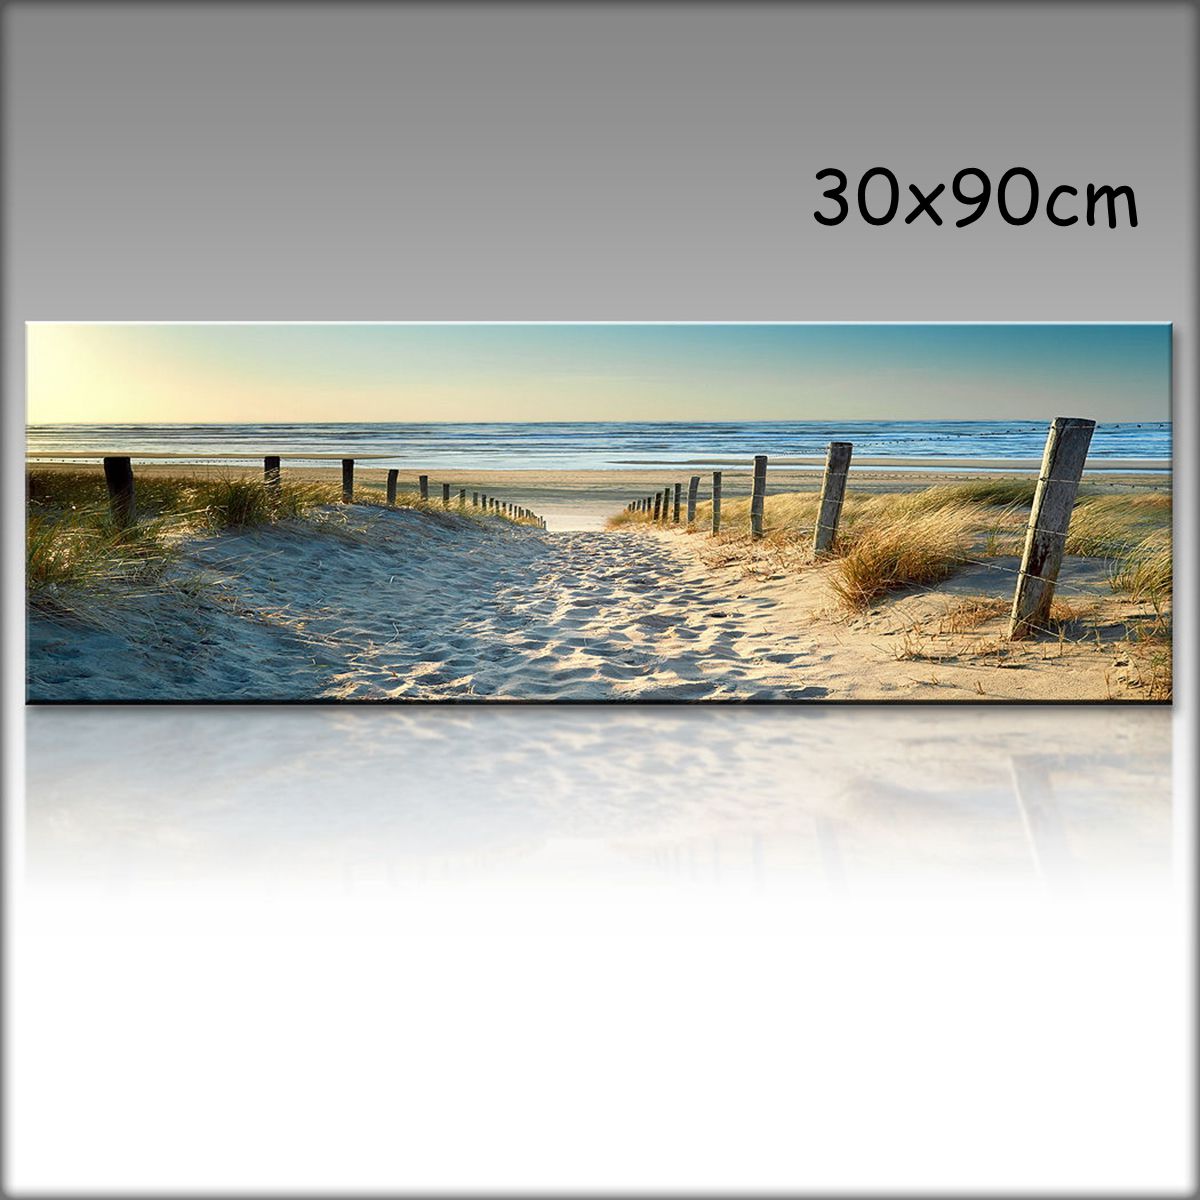 1 Piece Canvas Print Paintings Beach Sea Road Wall Decorative Print Art Pictures FramelessWall Hanging Decorations for Home Office